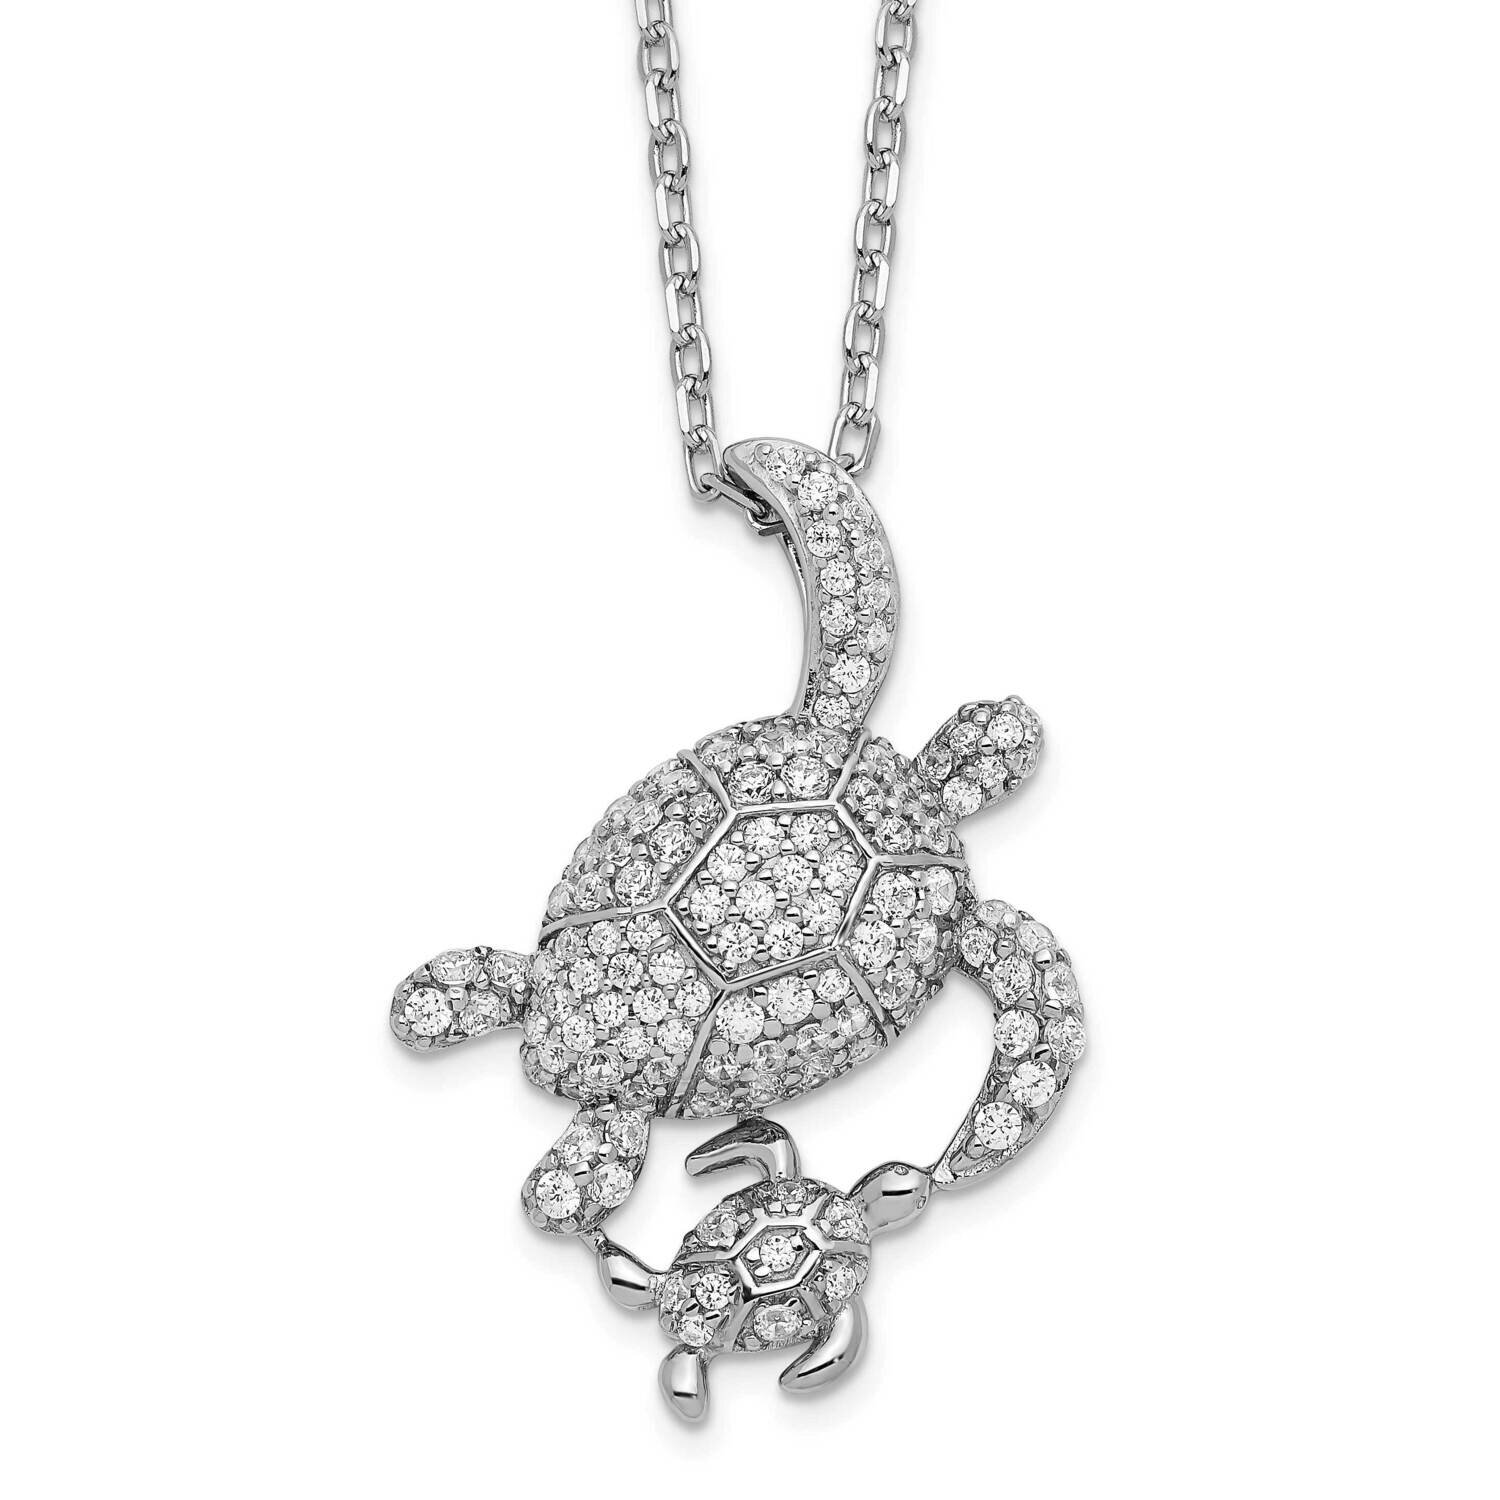 Cheryl M Rhodium-Plated CZ Diamond with 2 Inch Ext. Turtles Necklace Sterling Silver QCM1543-16